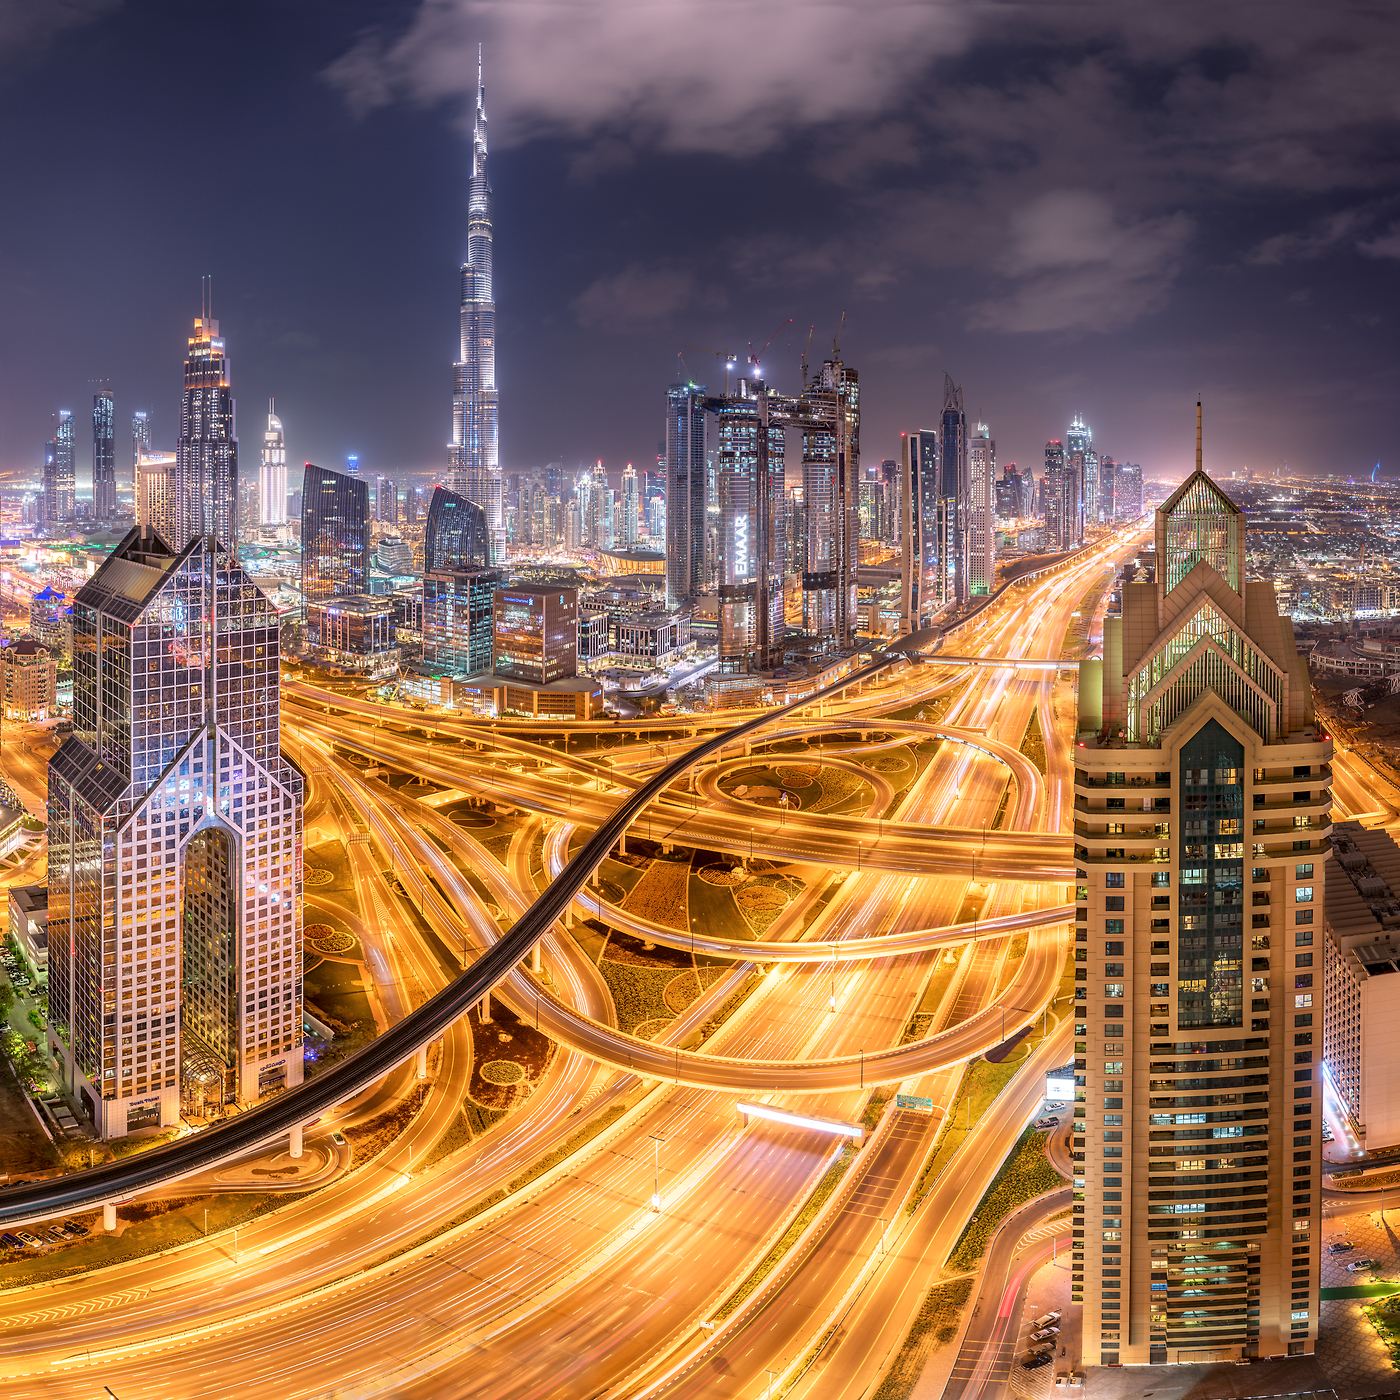 378 megapixels! A very high resolution, large-format nighttime photo of the Dubai skyline and highways with the Burj Khalifa; fine art cityscape photograph created by Tim Shields in the United Arab Emirates